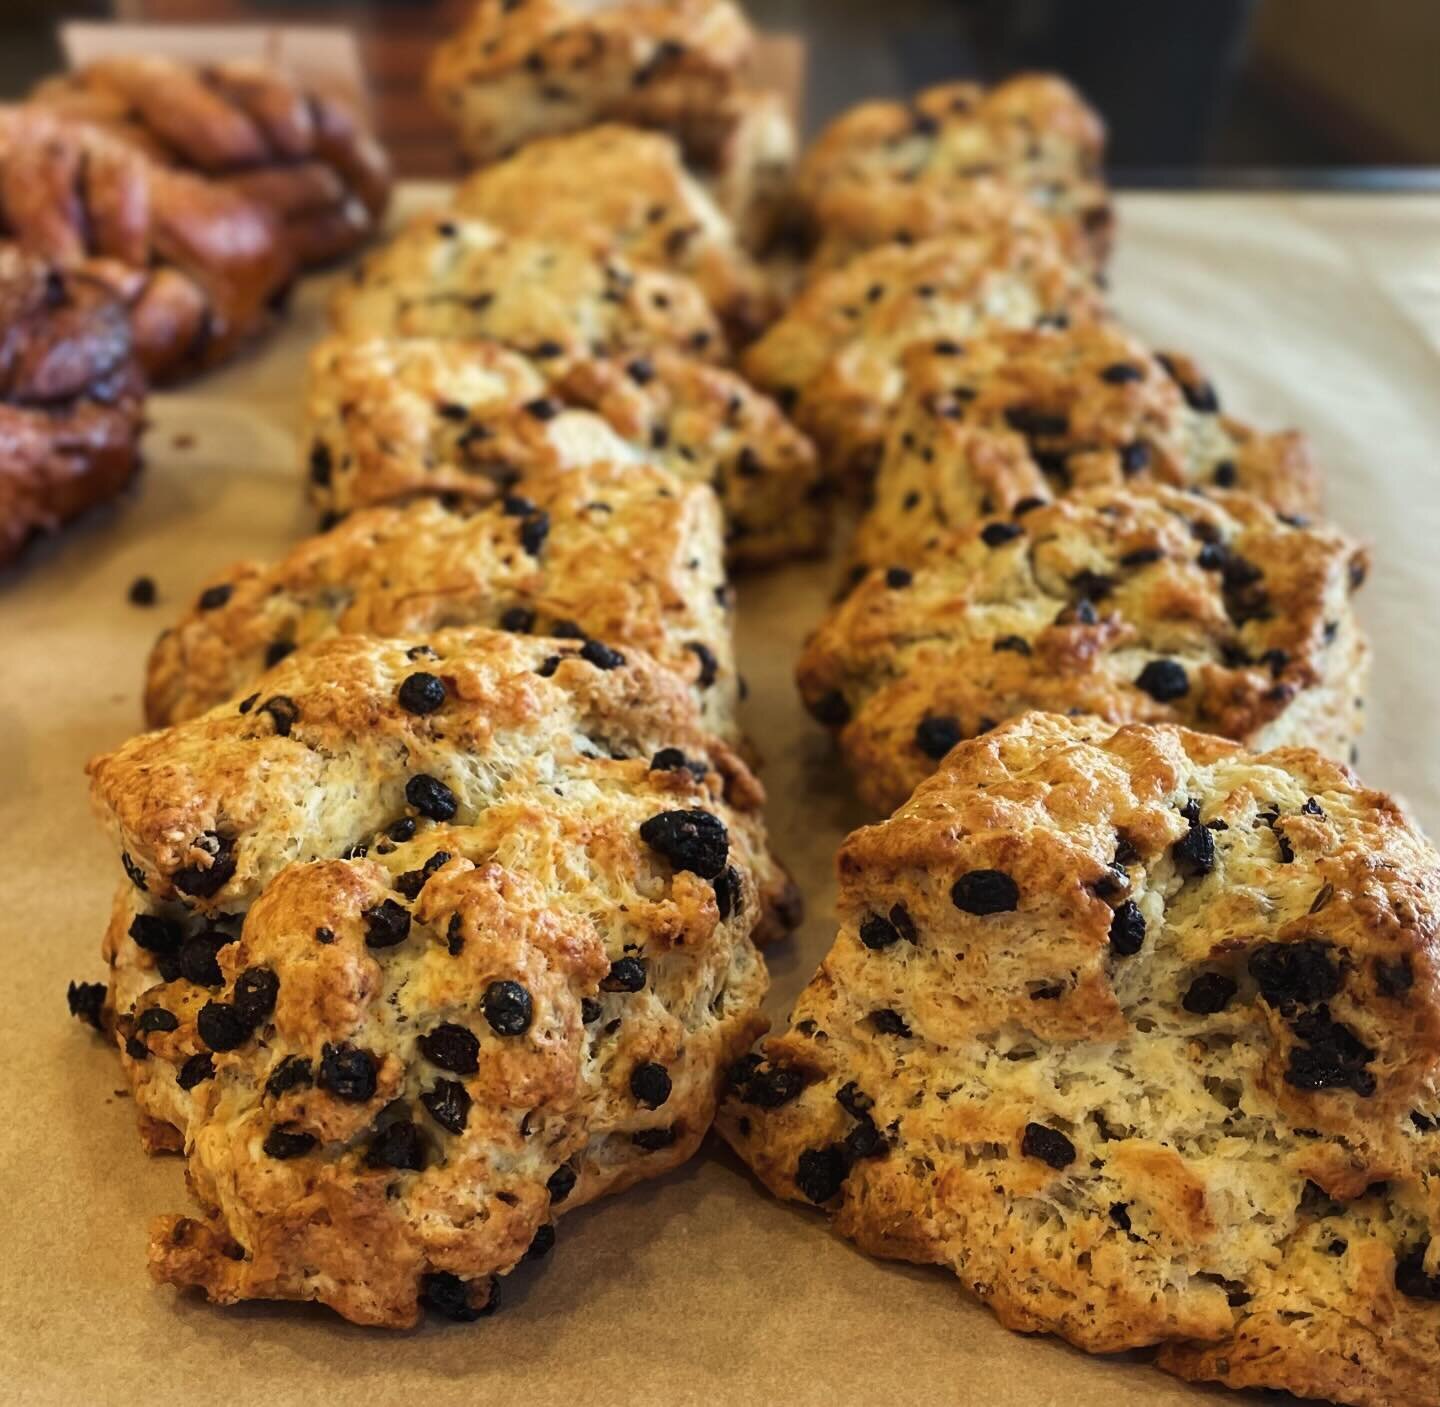 Irish Soda Bread is back for this week only!! Stop by and get some while it&rsquo;s here. 

#irishsodabread #stpatricksday #bakery #bakeries #bakedgoods #cafe #coffeeshop #bakerylife #hoodriver #hoodriveroregon #oregon #pnw #pinestreetbakeryhoodriver